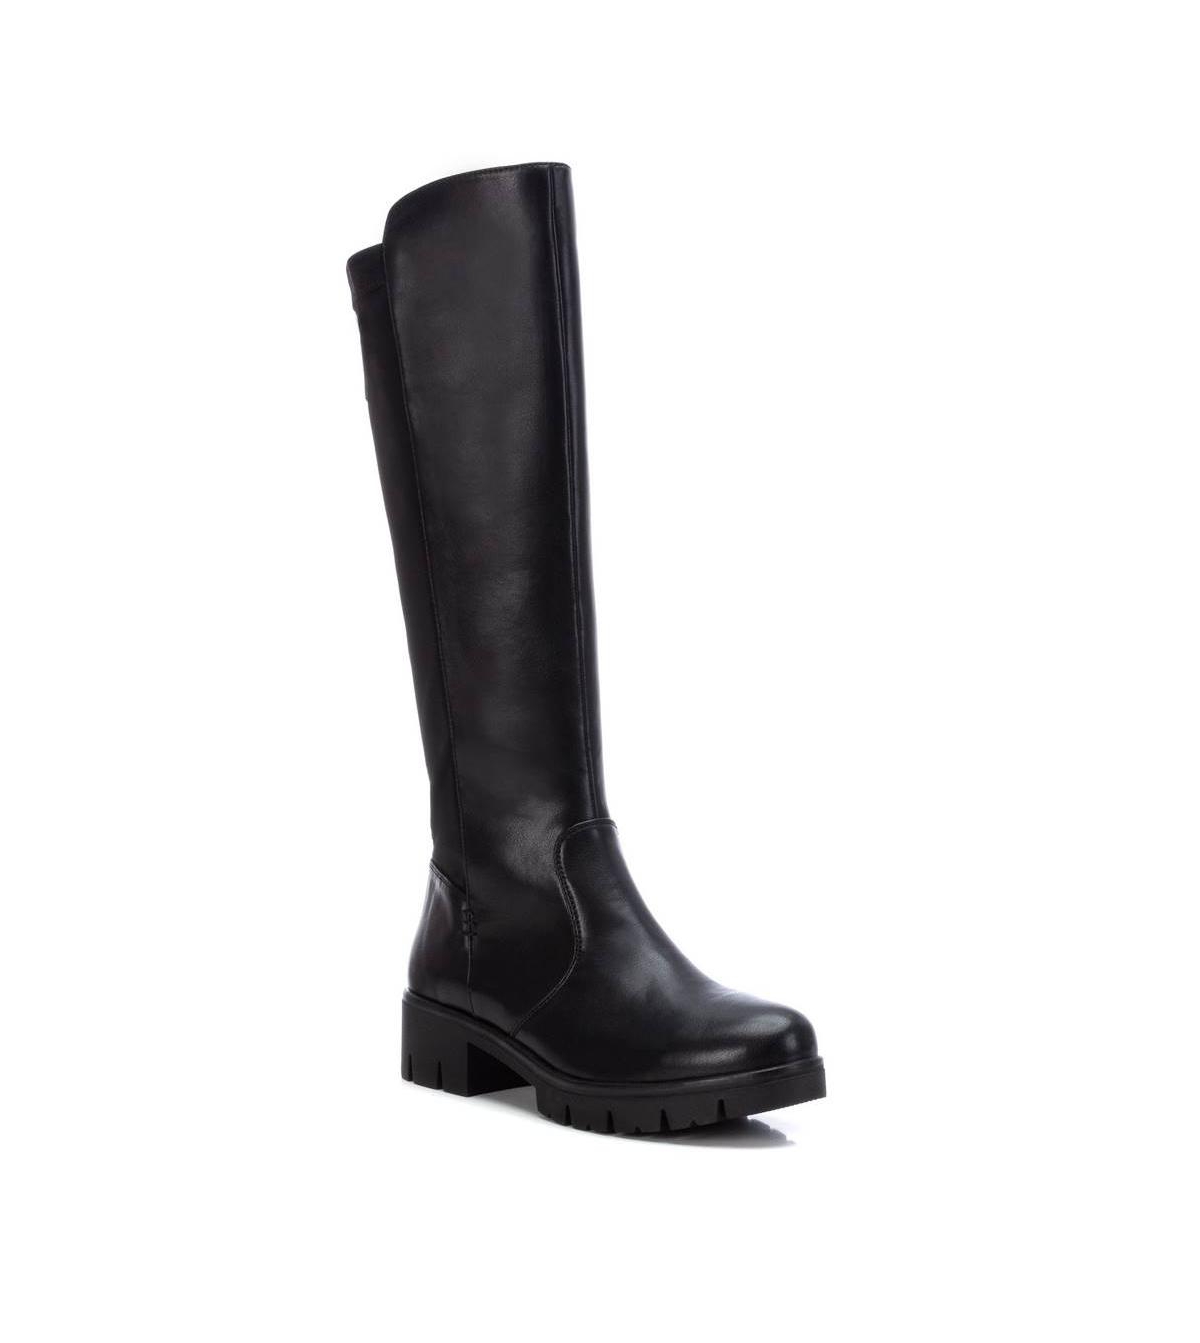 Women's Knee High Boots By Xti - Black